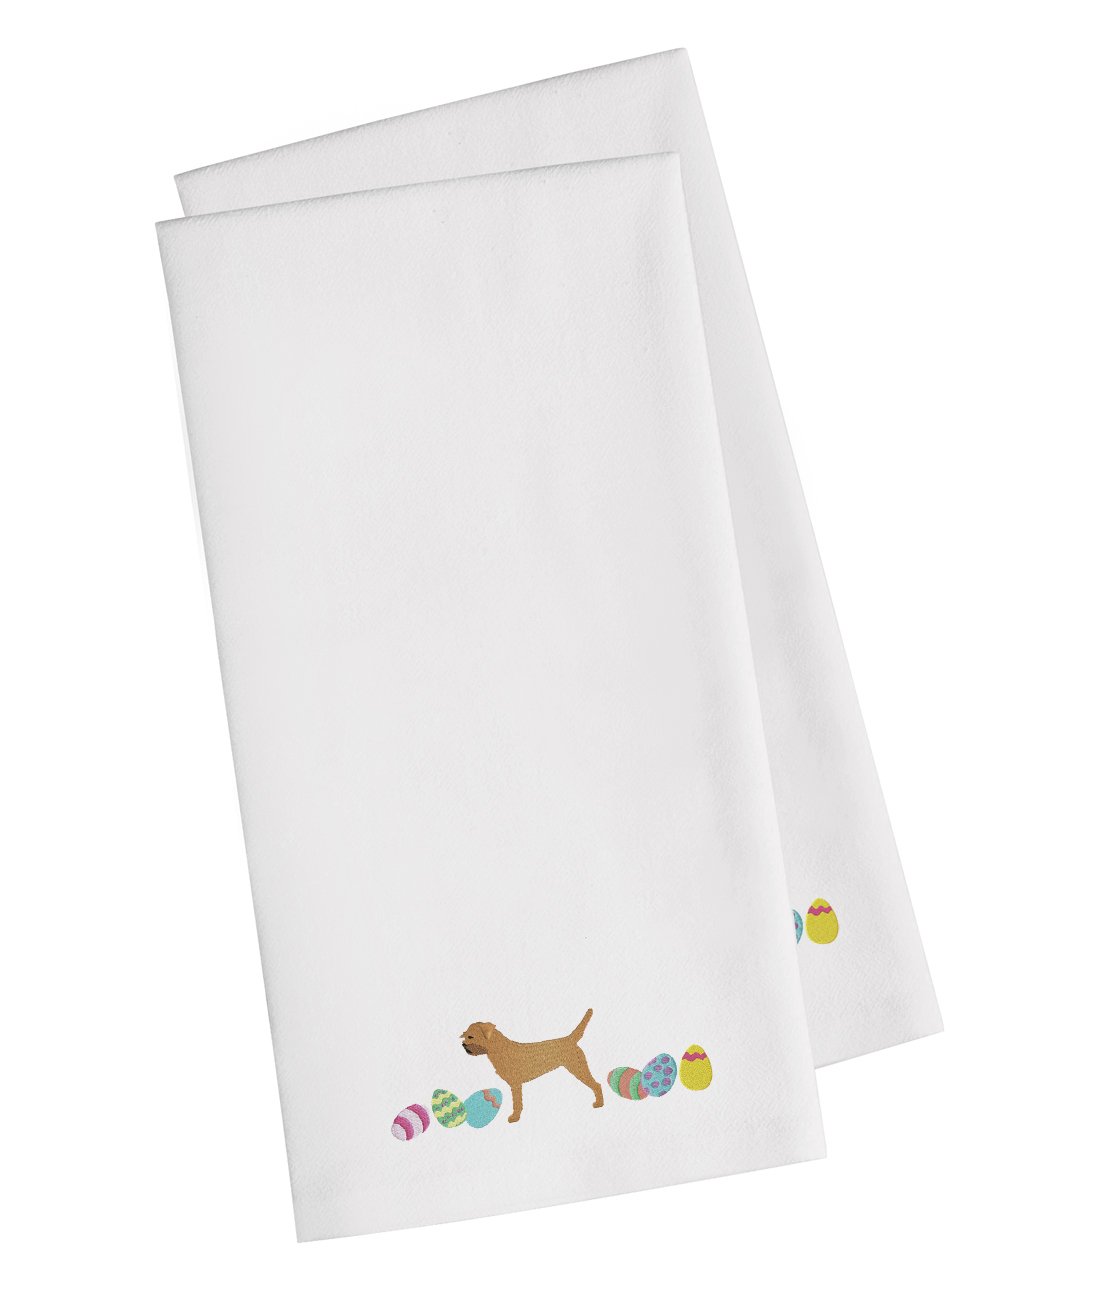 Border Terrier Easter White Embroidered Kitchen Towel Set of 2 CK1613WHTWE by Caroline's Treasures